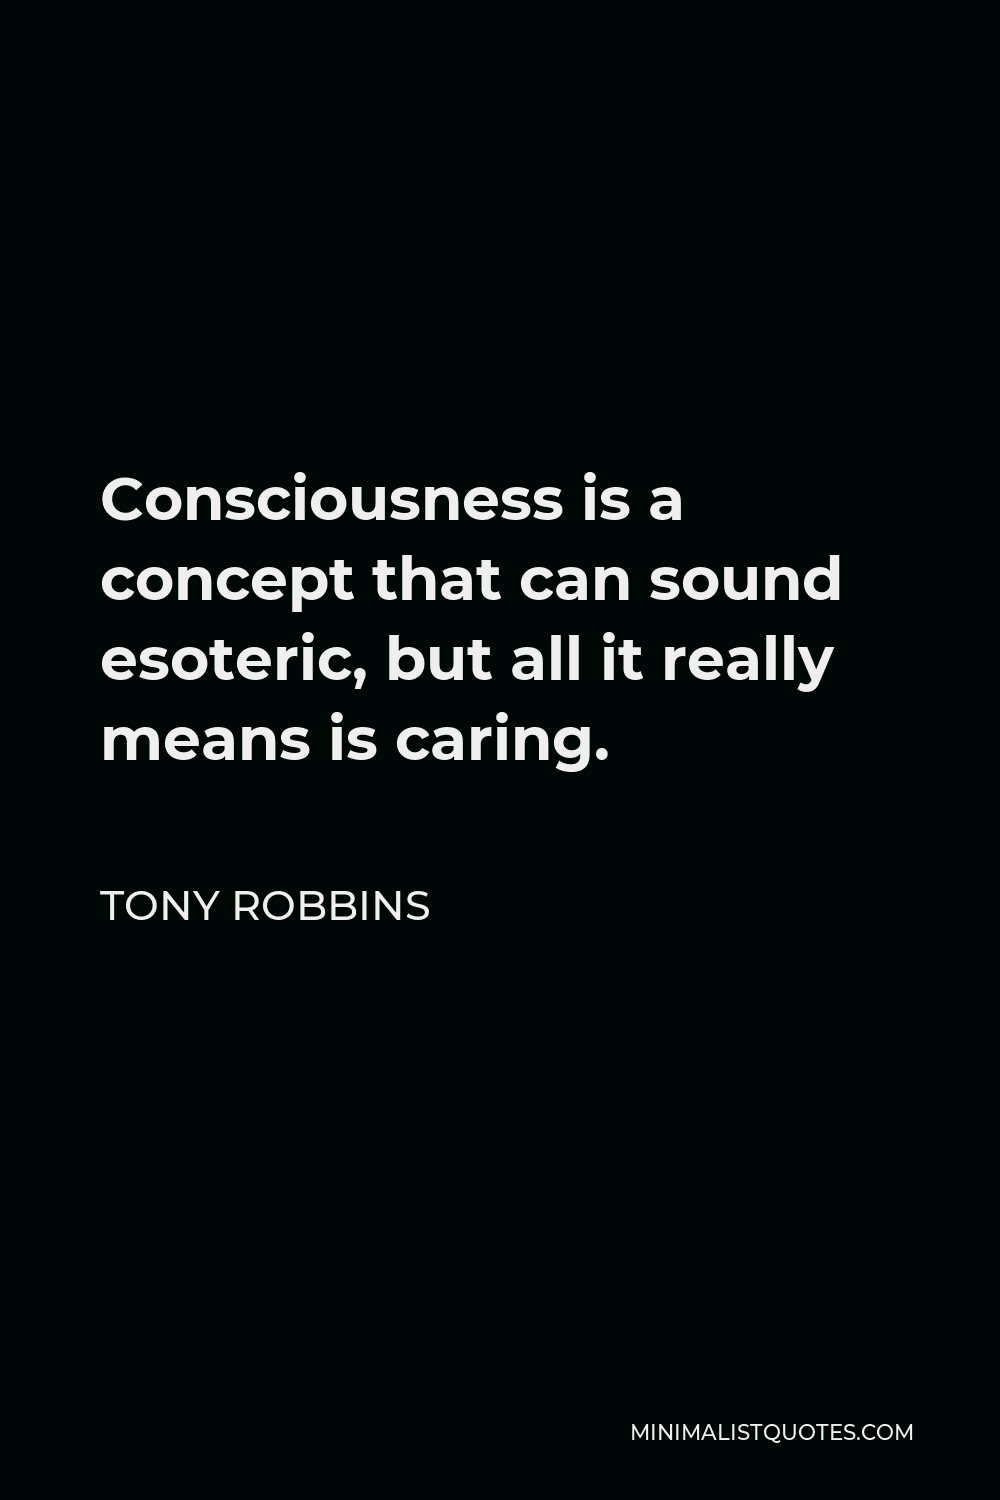 Tony Robbins Quote - Consciousness is a concept that can sound esoteric, but all it really means is caring.